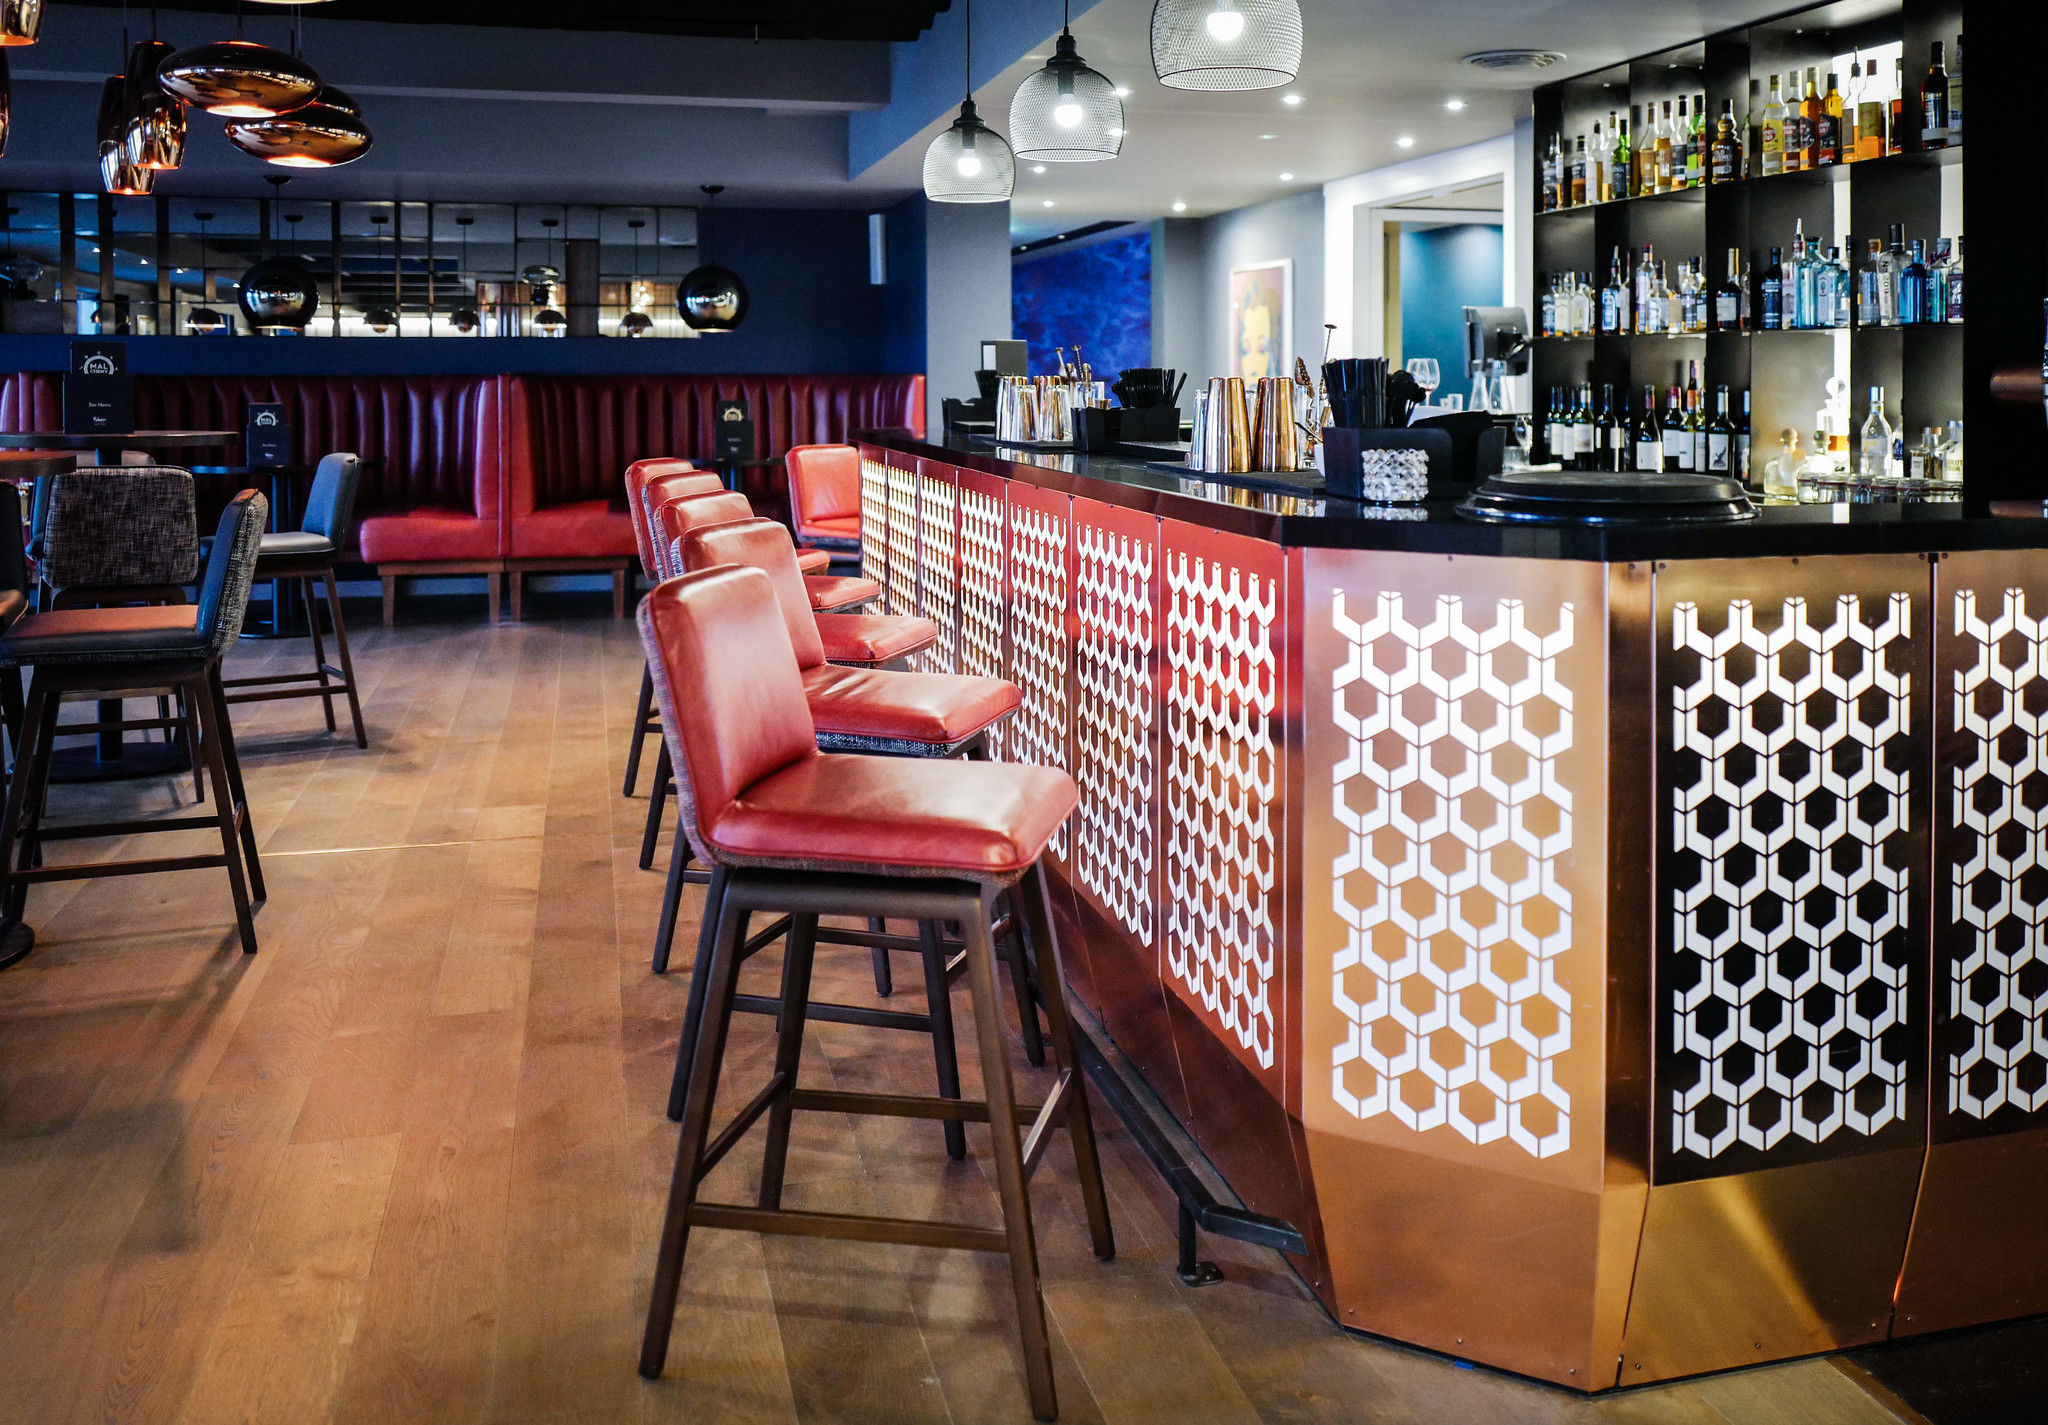 Malmaison Brighton. Interior shot of the bar area, golden and white bar with dark red bar stools